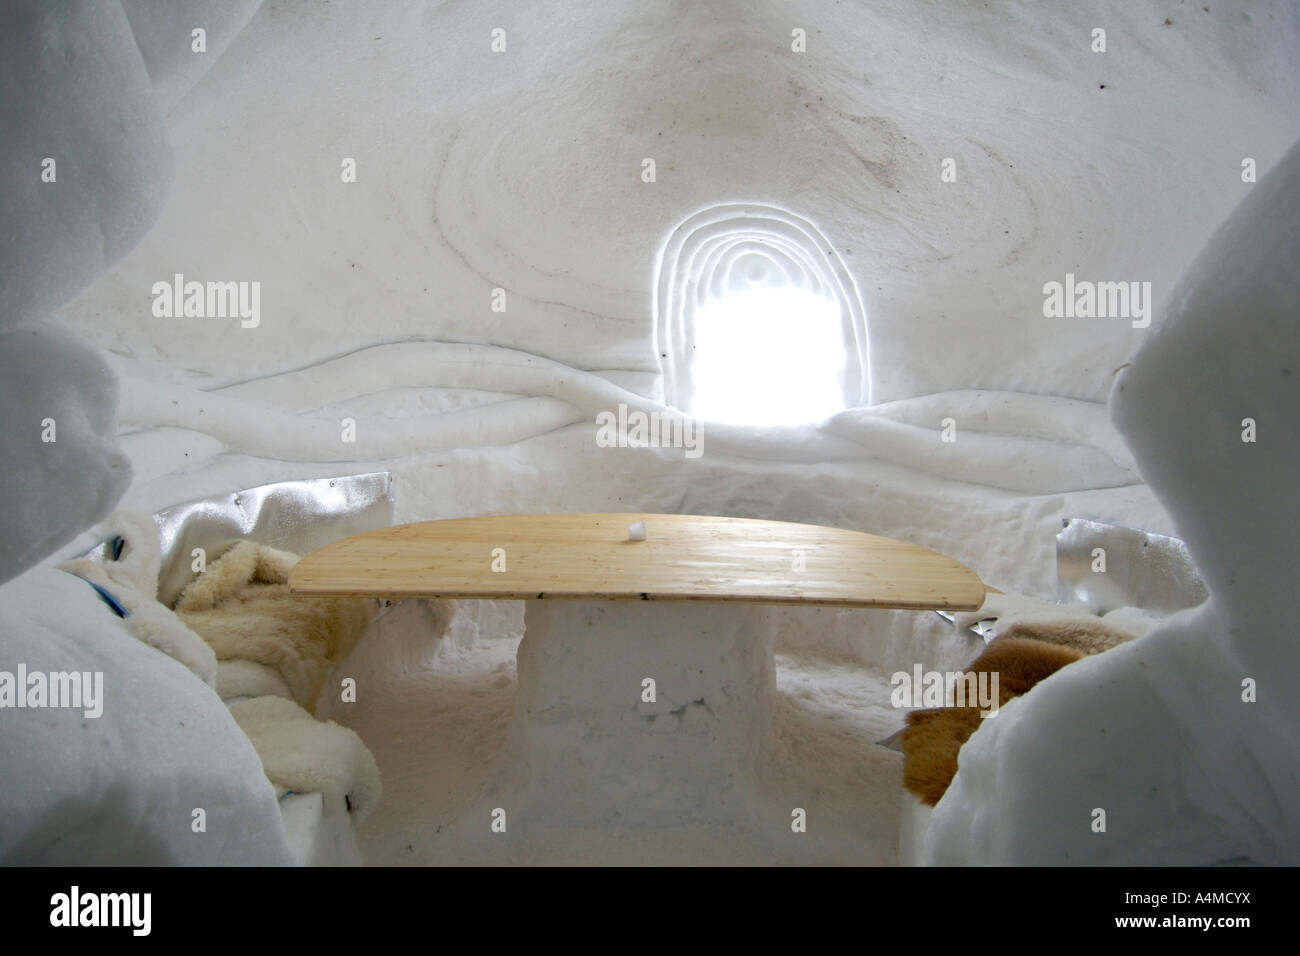 Interior of the Iglu dorf ice hotel on the slopes of Mount Titlis in Switzerland. Stock Photo